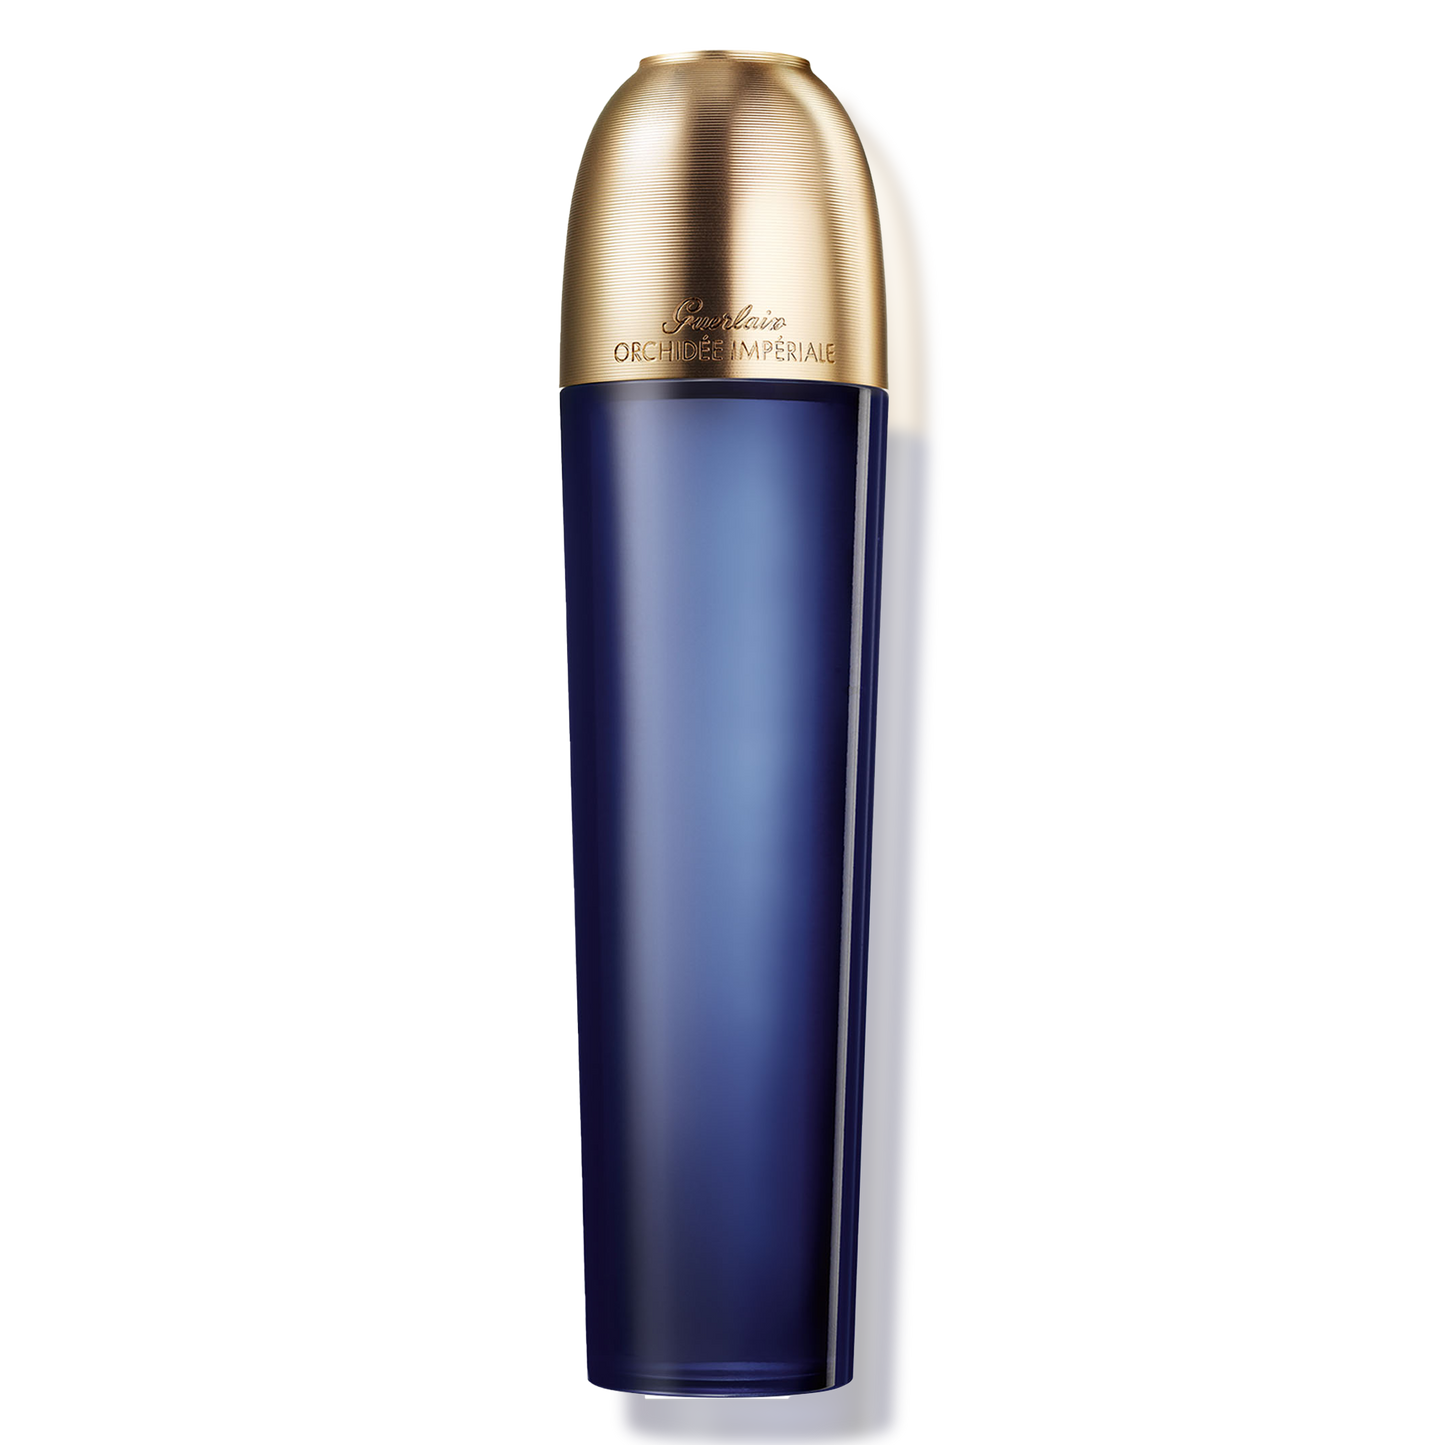 Orchidee Imperiale Lotion